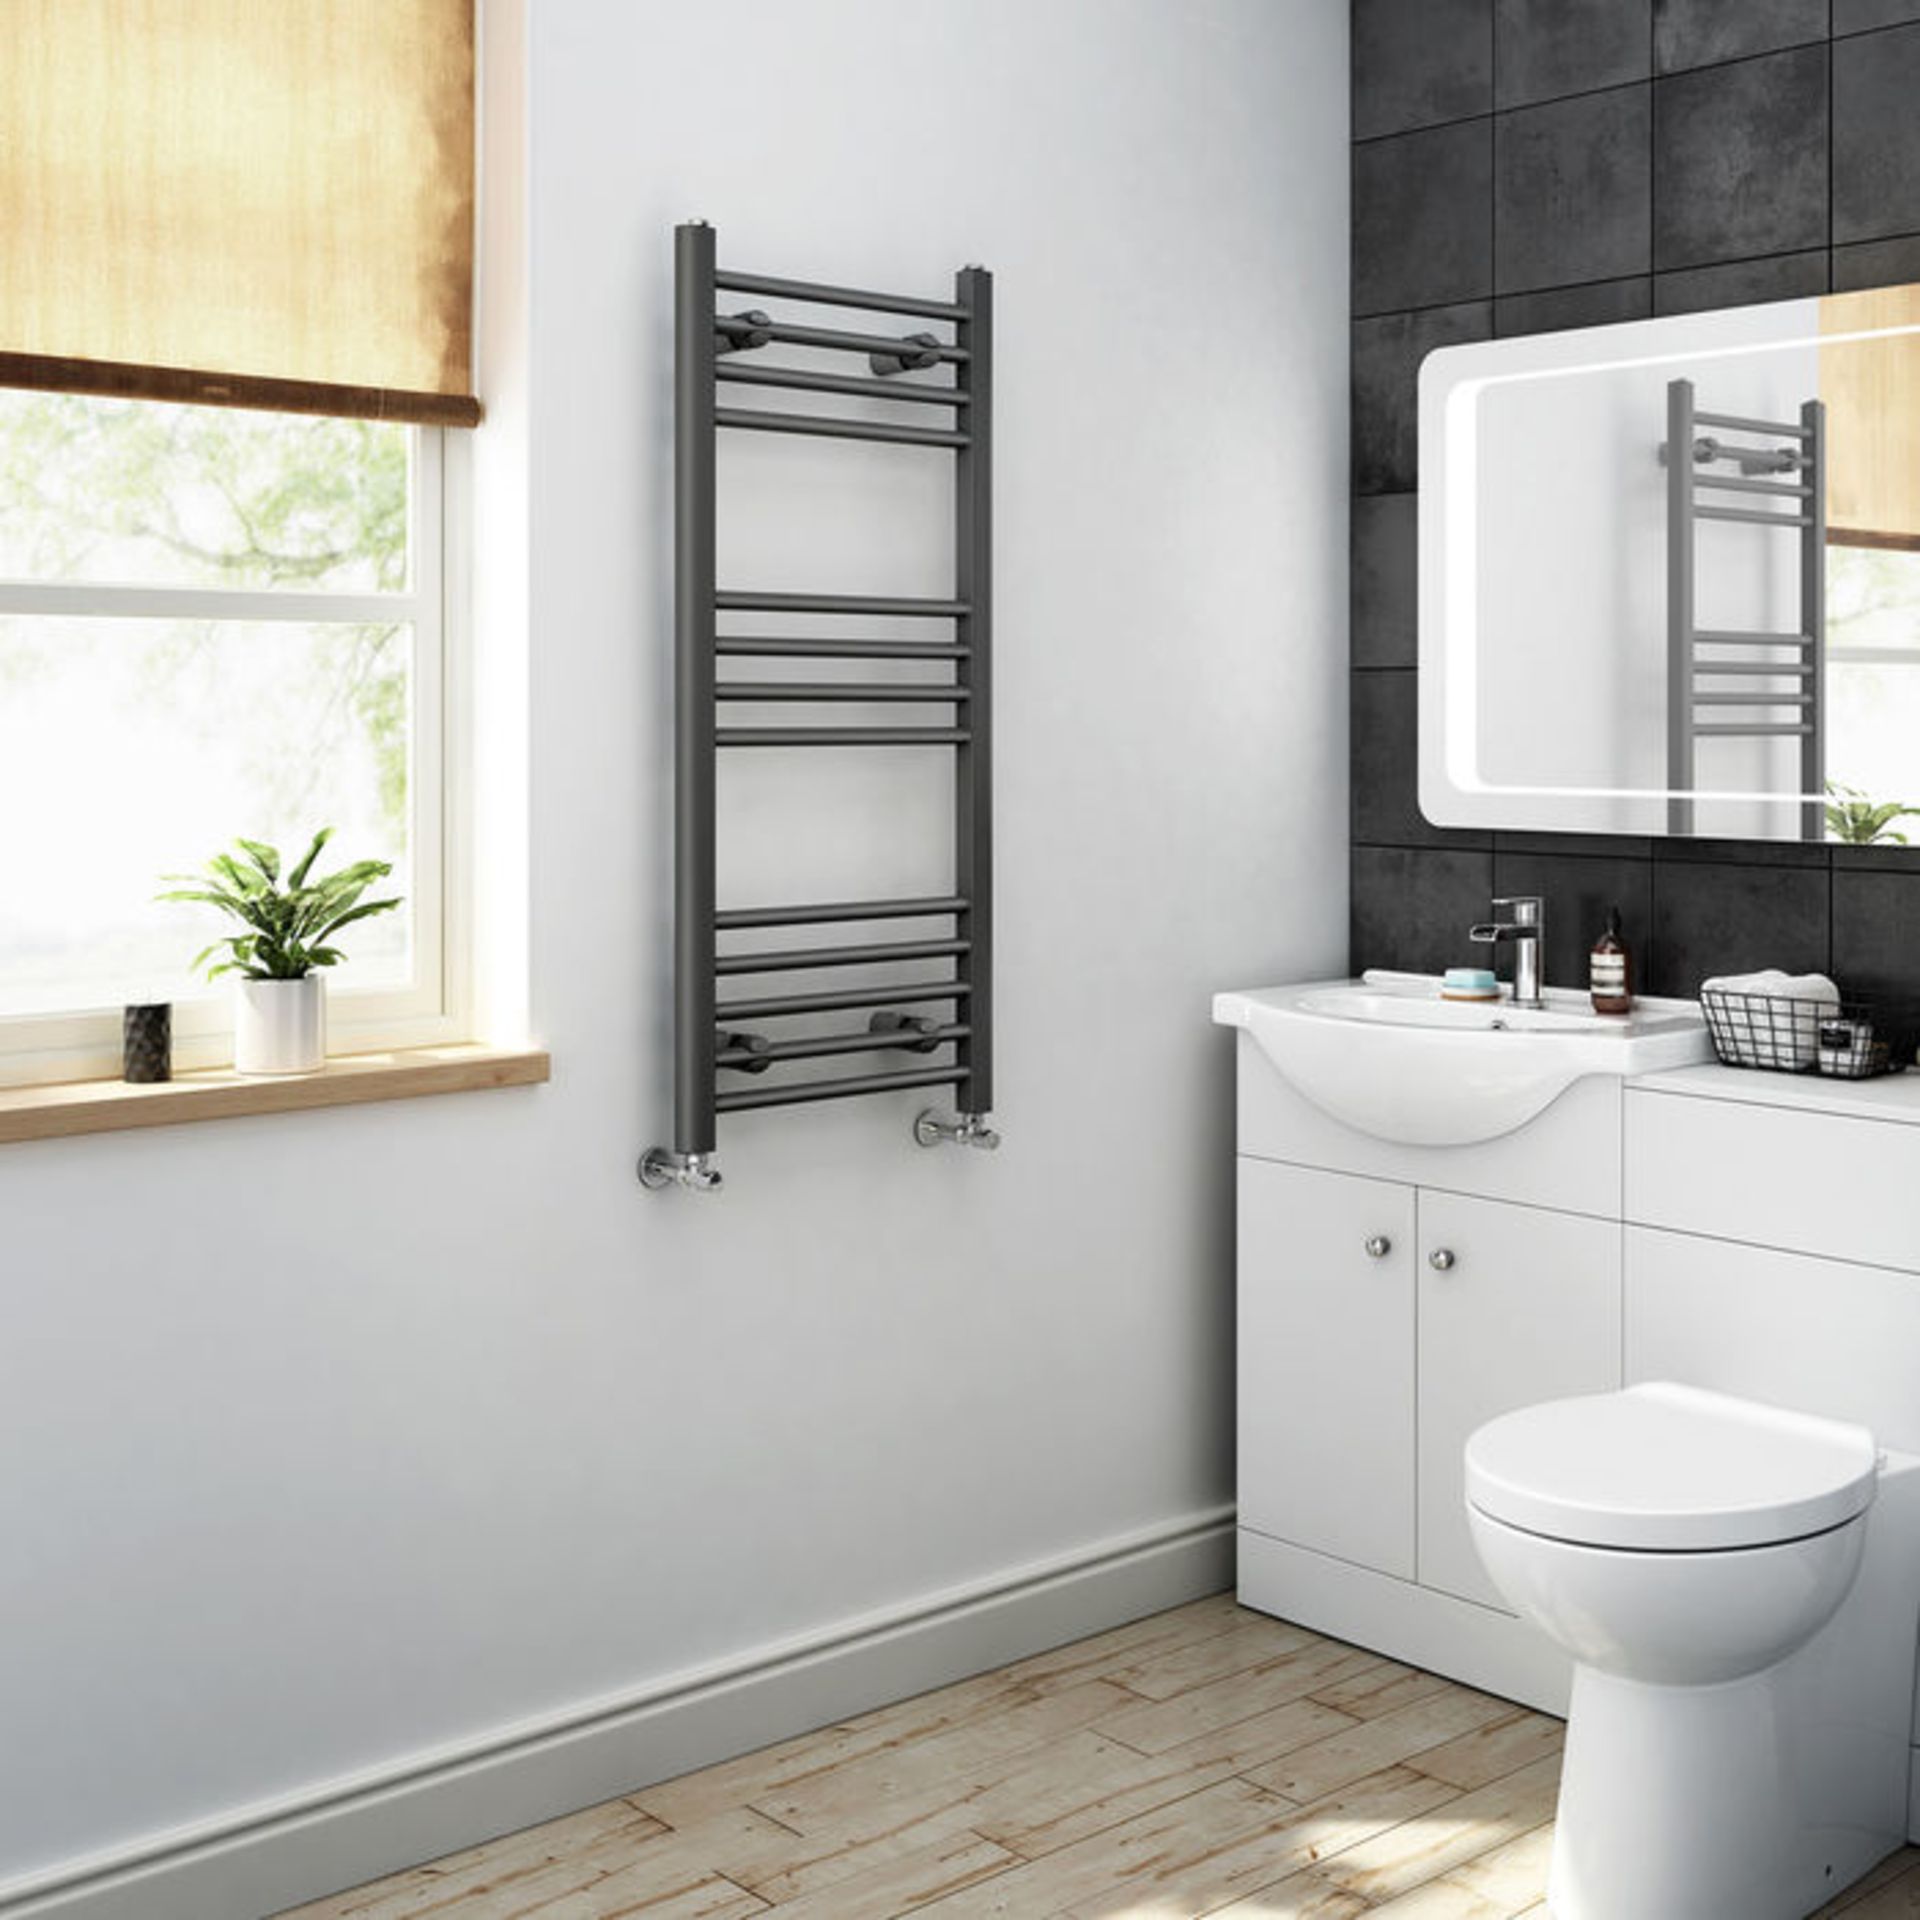 (JM219) 1000x450mm - 20mm Tubes - Anthracite Heated Straight Rail Ladder Towel Radiator. RRP £64.99. - Image 2 of 3